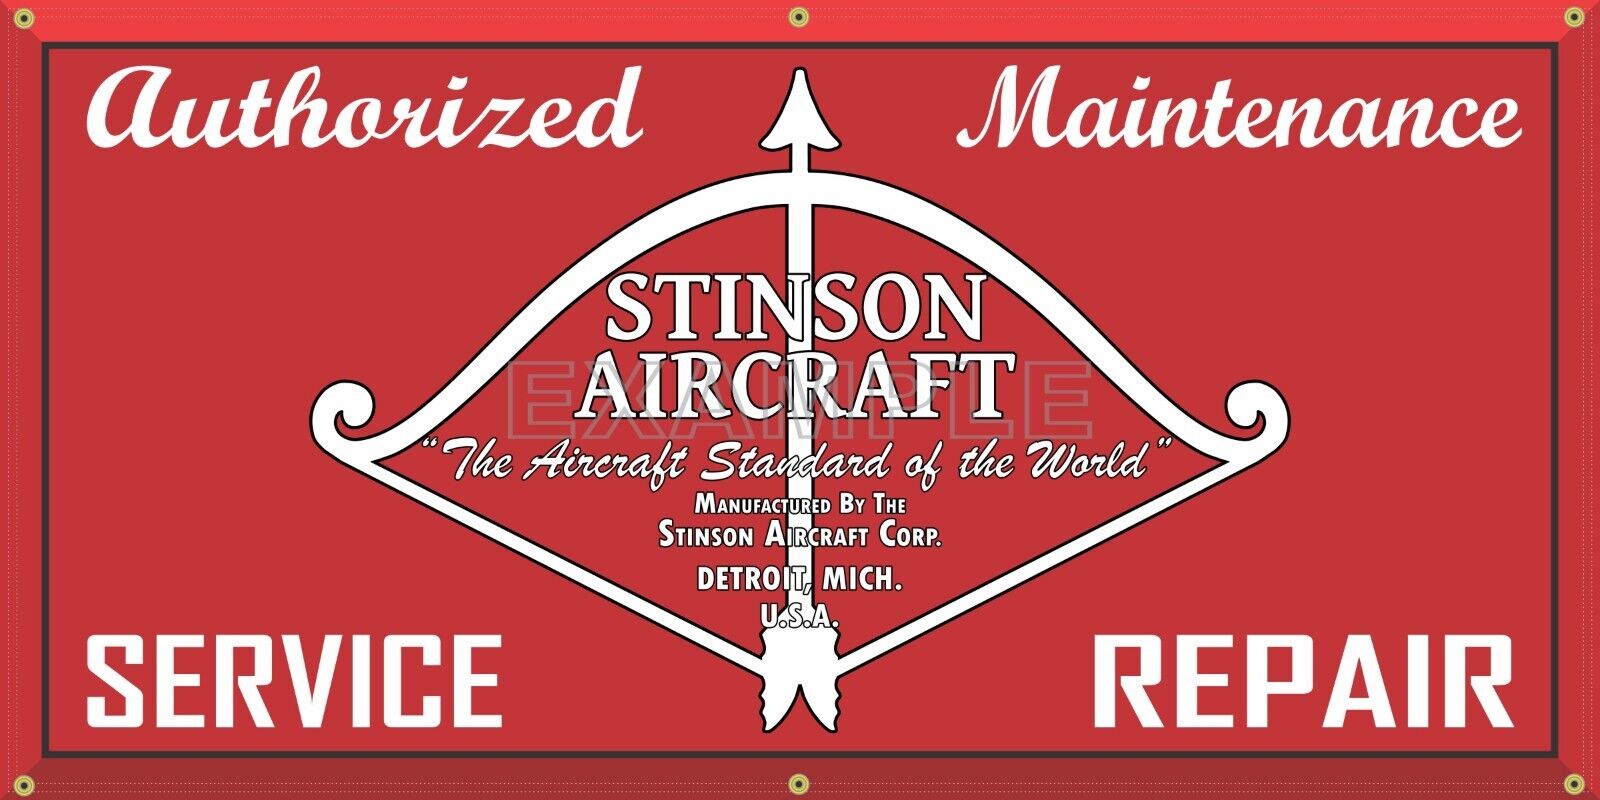 STINSON AIRCRAFT COMPANY AIRPLANE DEALER REPAIR SIGN REMAKE BANNER SIZE OPTIONS